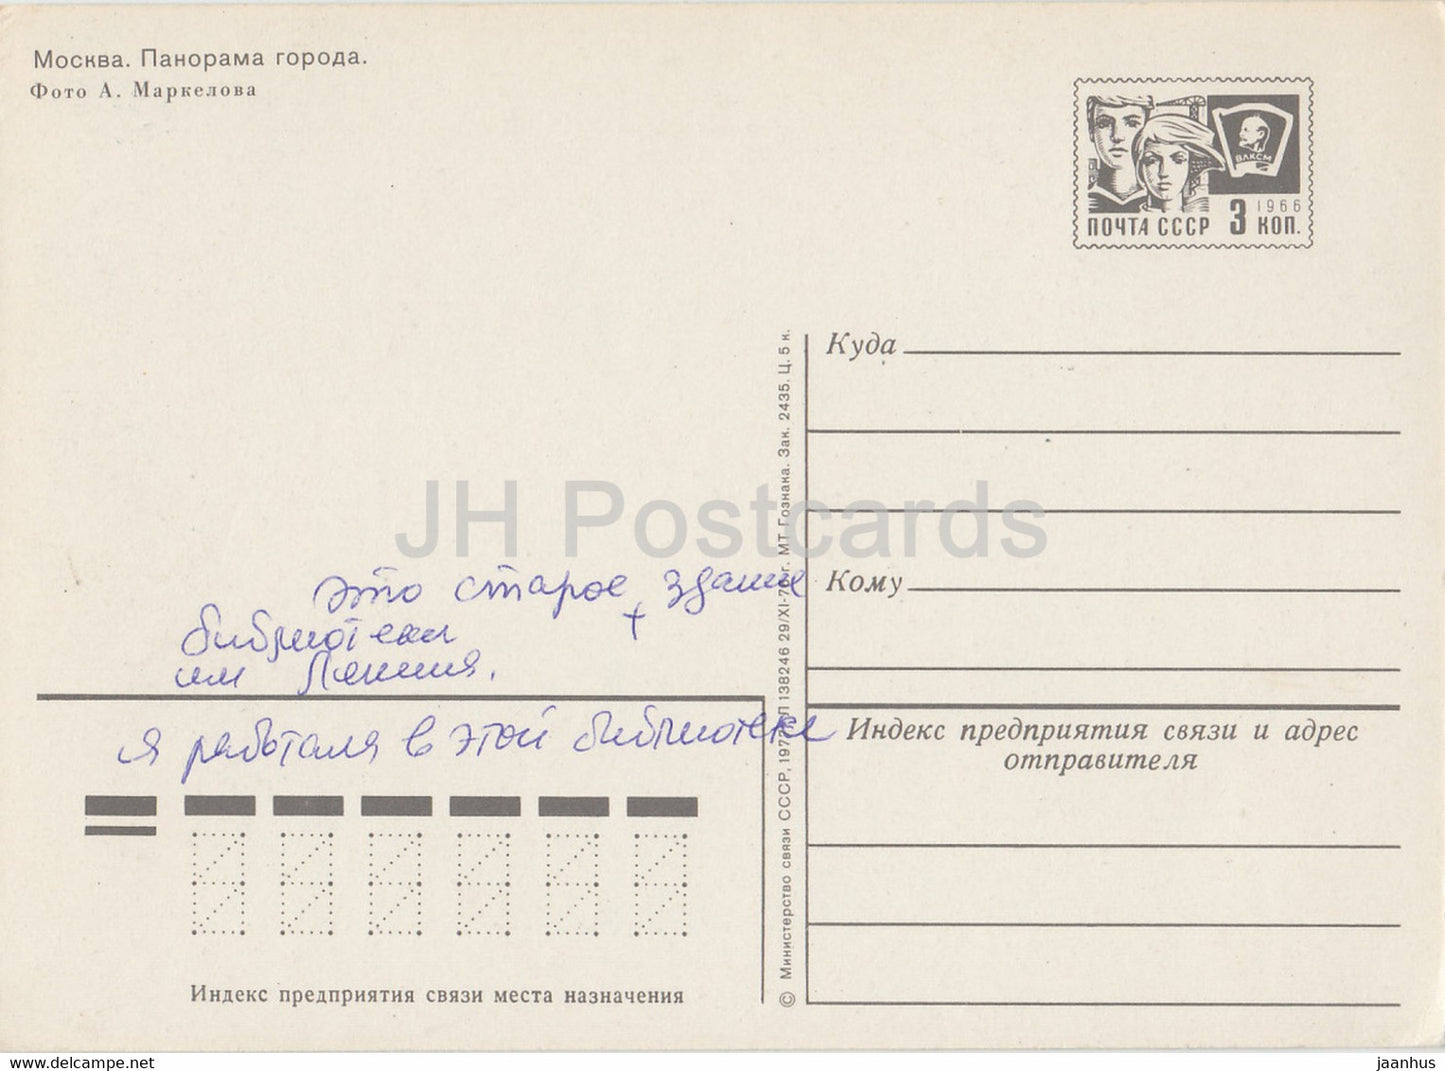 Moscow - City Panorama - postal stationery - 1977 - Russia USSR - used